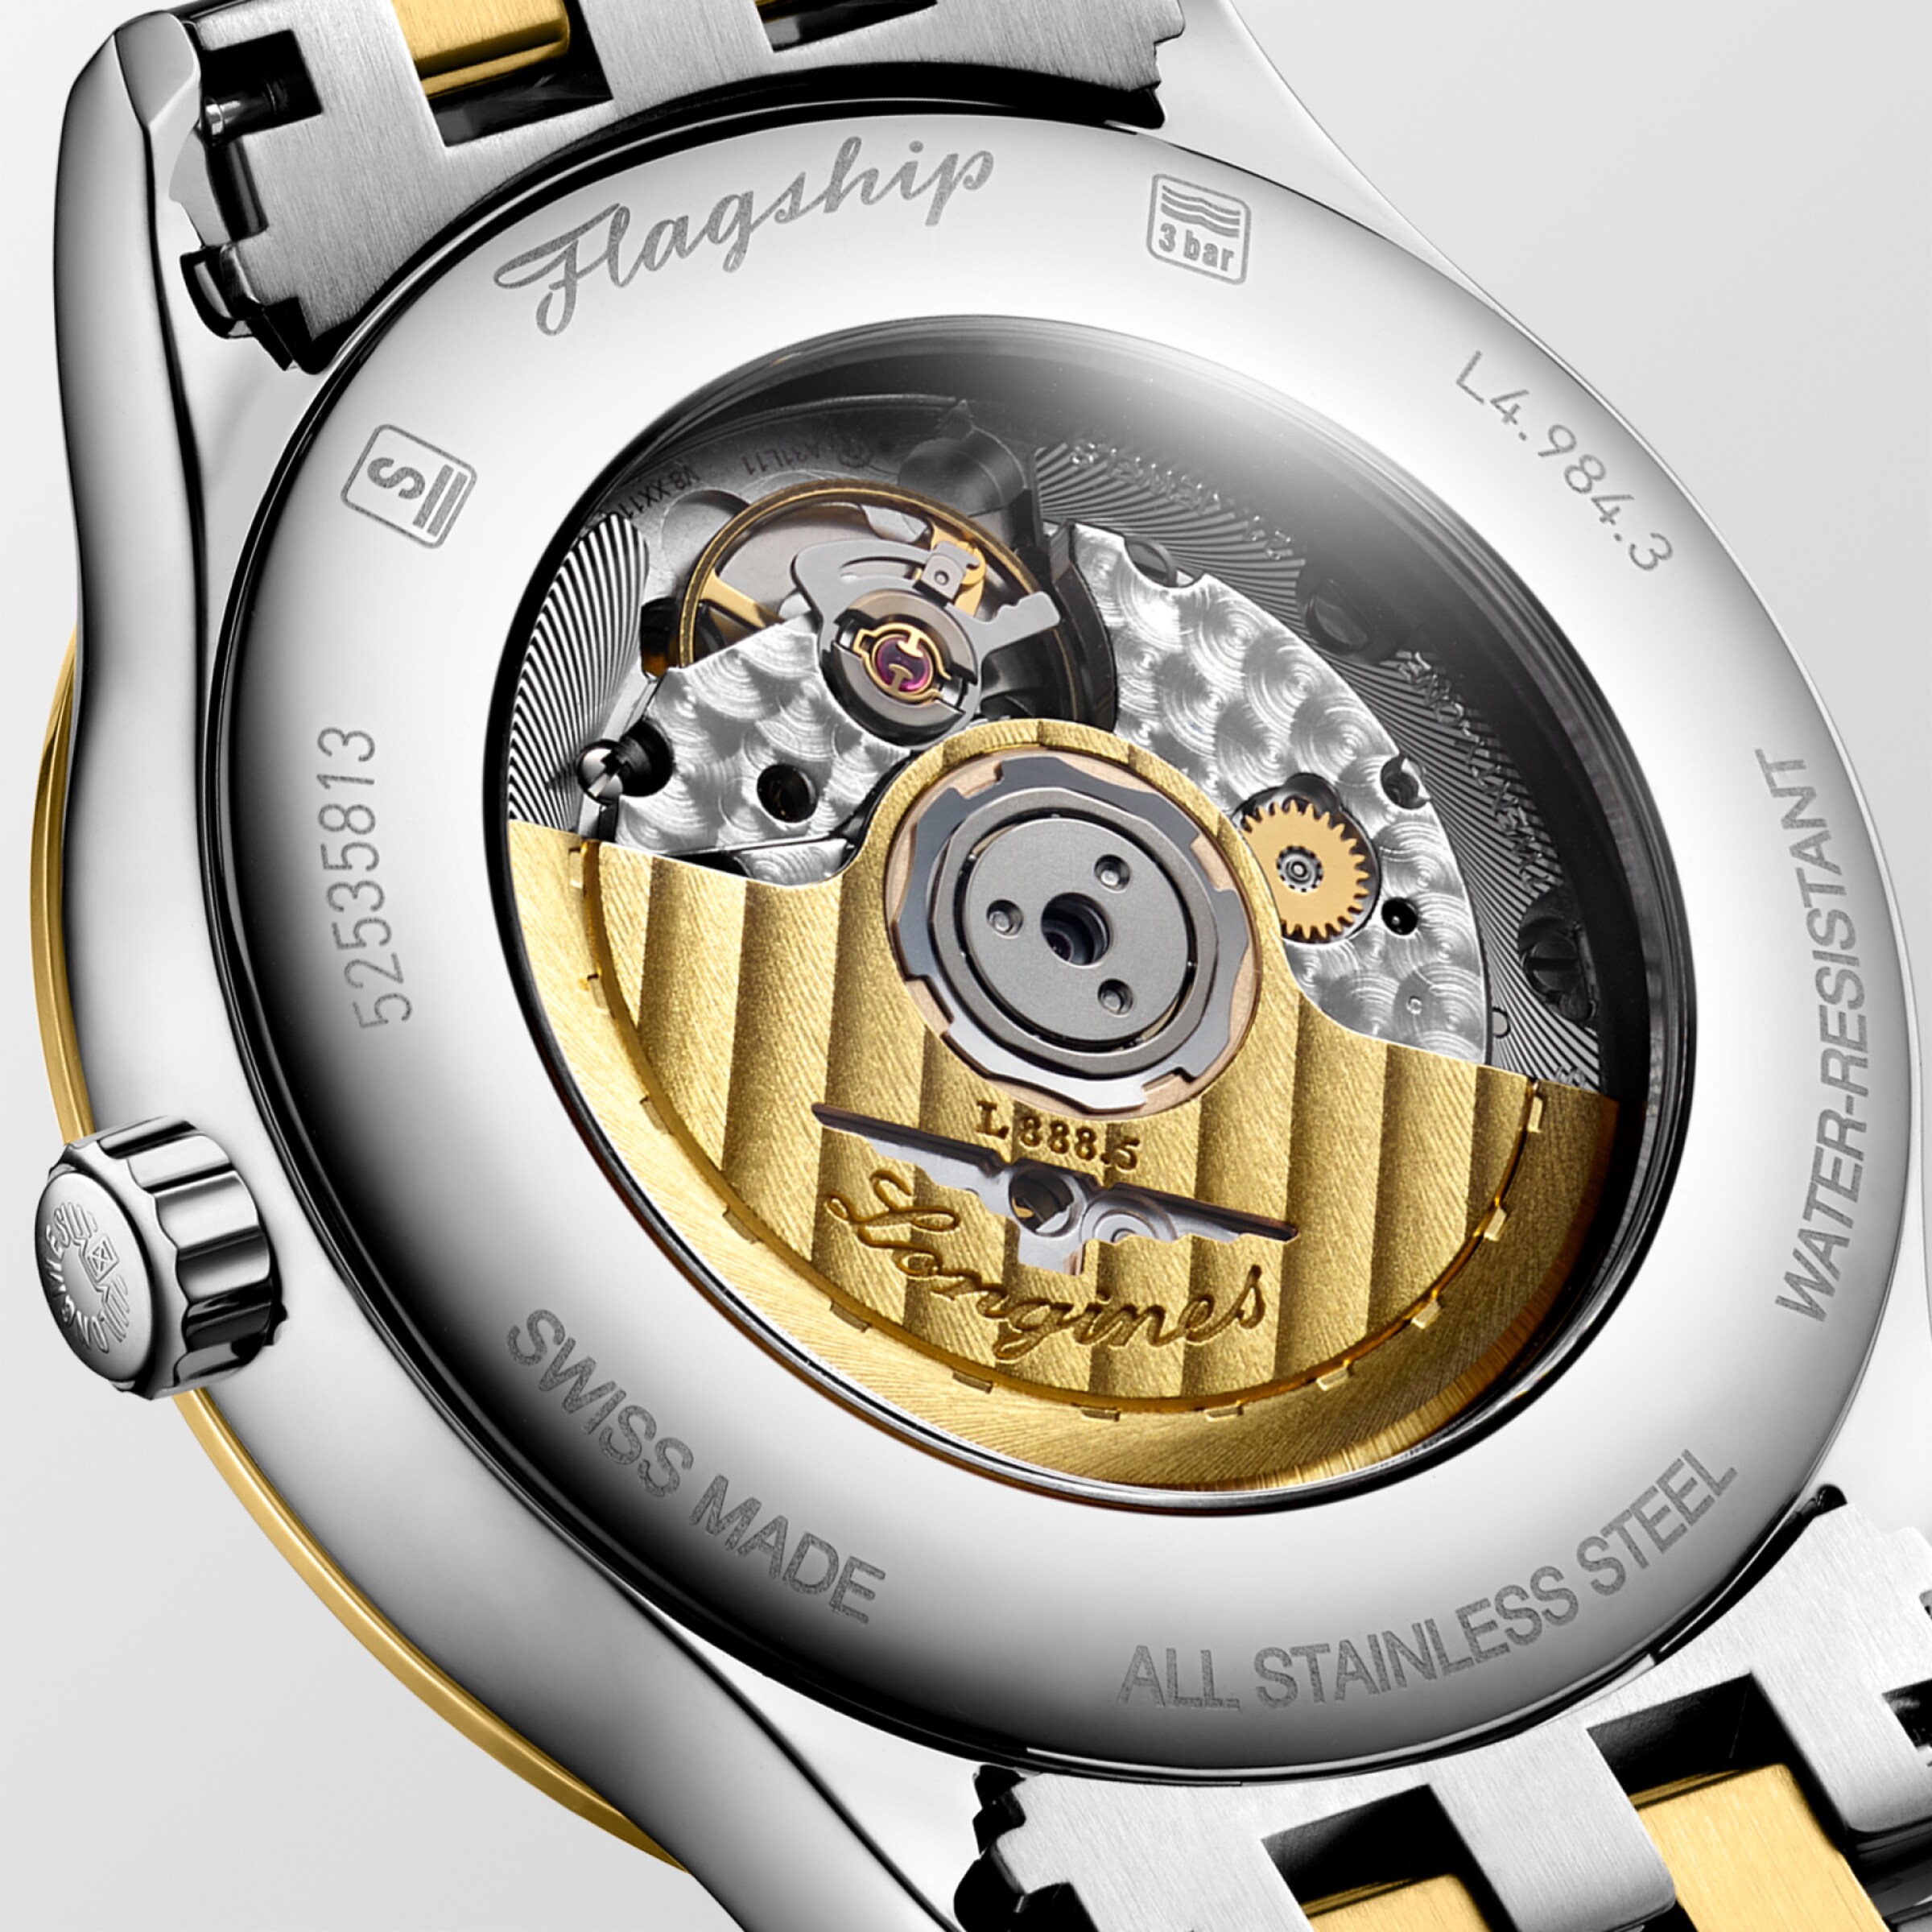 Longines FLAGSHIP Automatic Stainless steel and yellow PVD coating Watch - L4.984.3.22.7